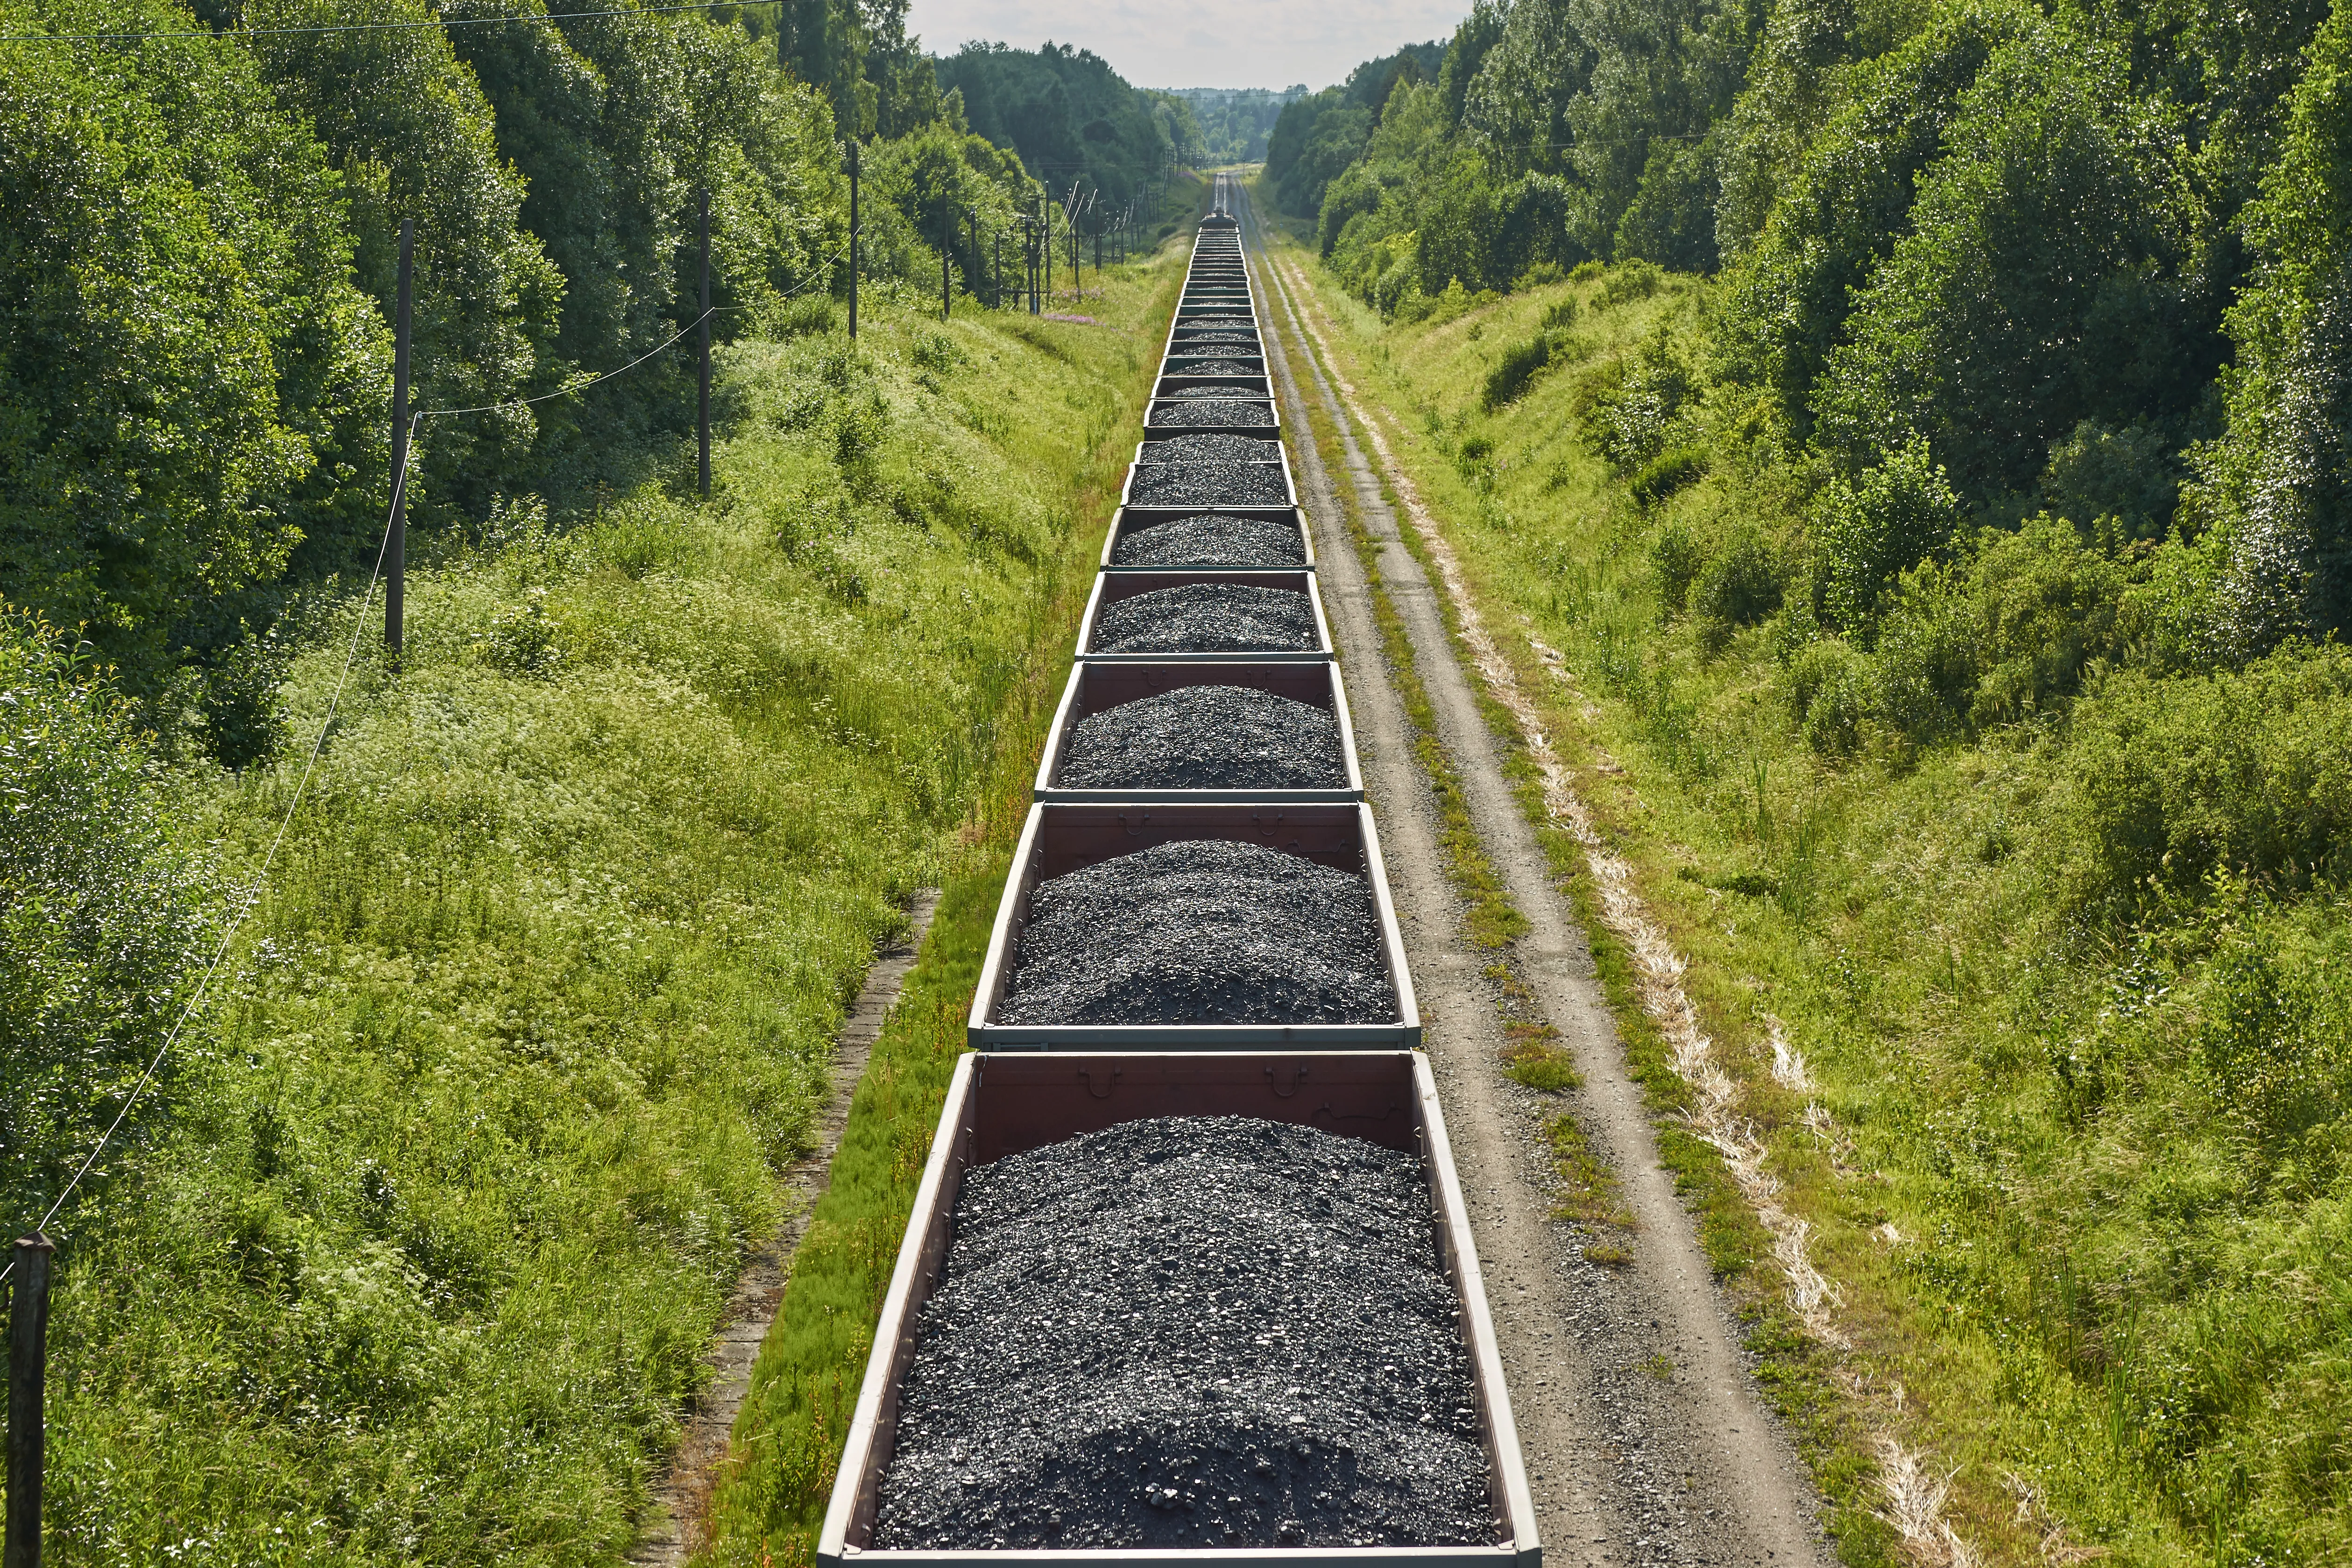 Train cars loaded with coal stretching into the distance with trees on both sides.